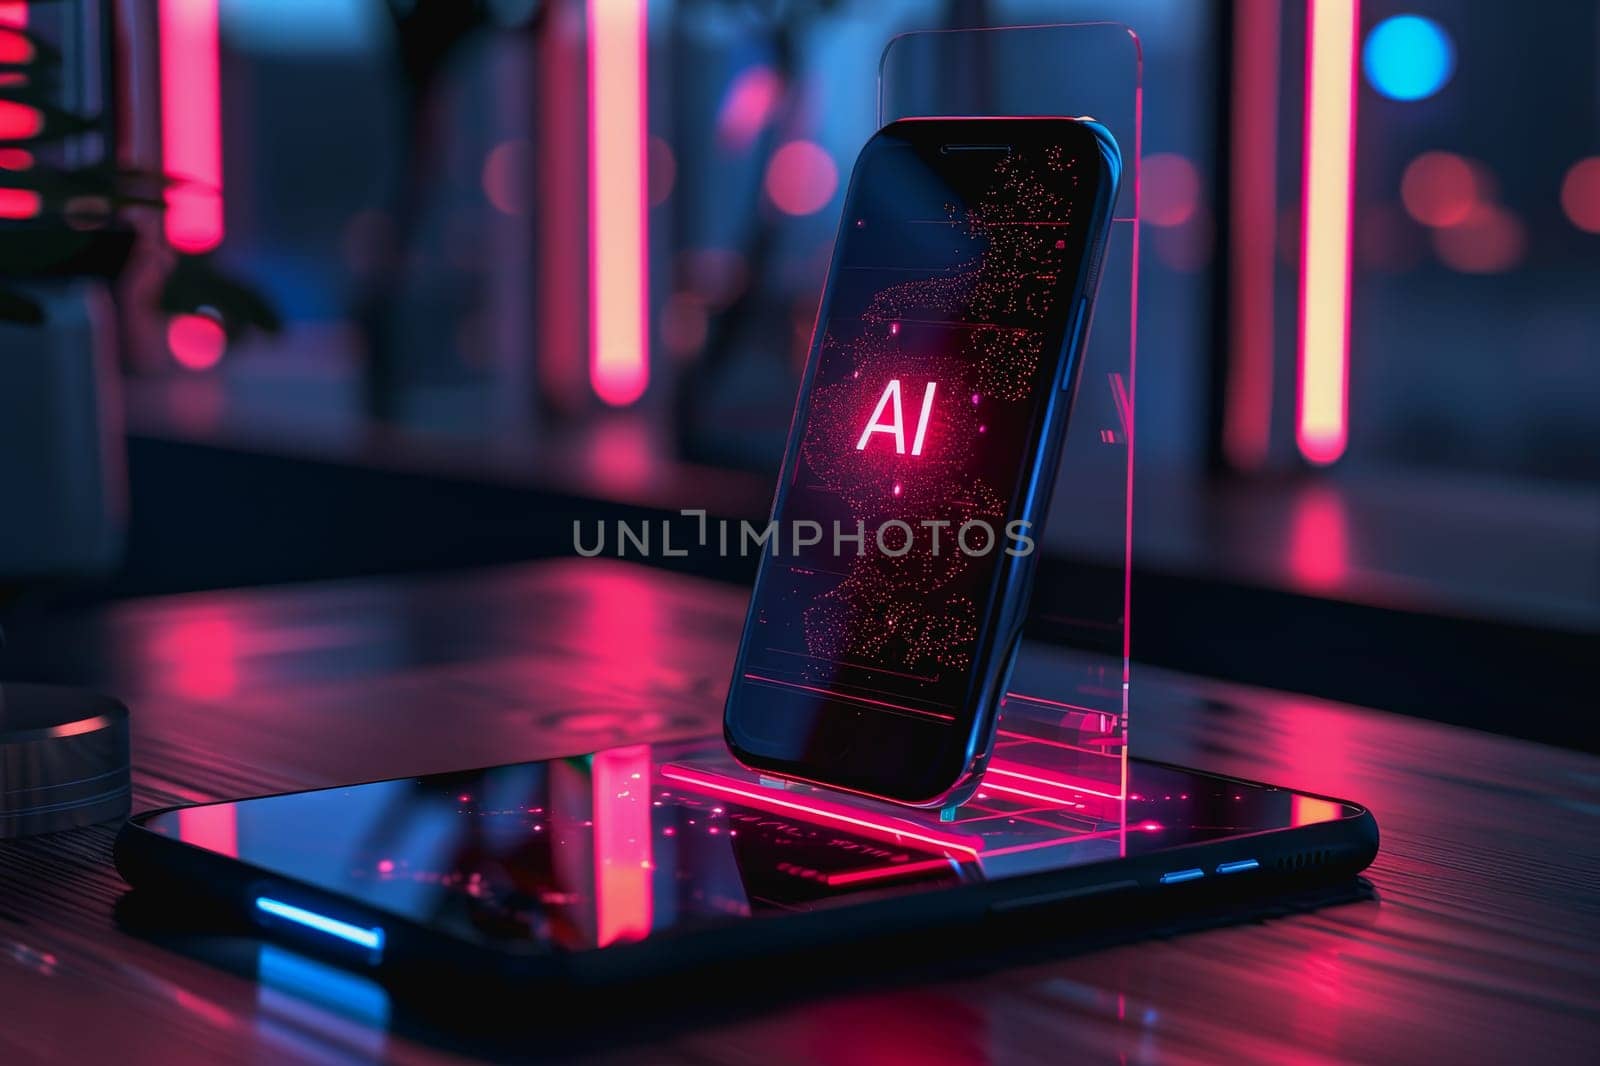 ransparent smartphone display on with AI text to the screen for futuristic technology concepts.